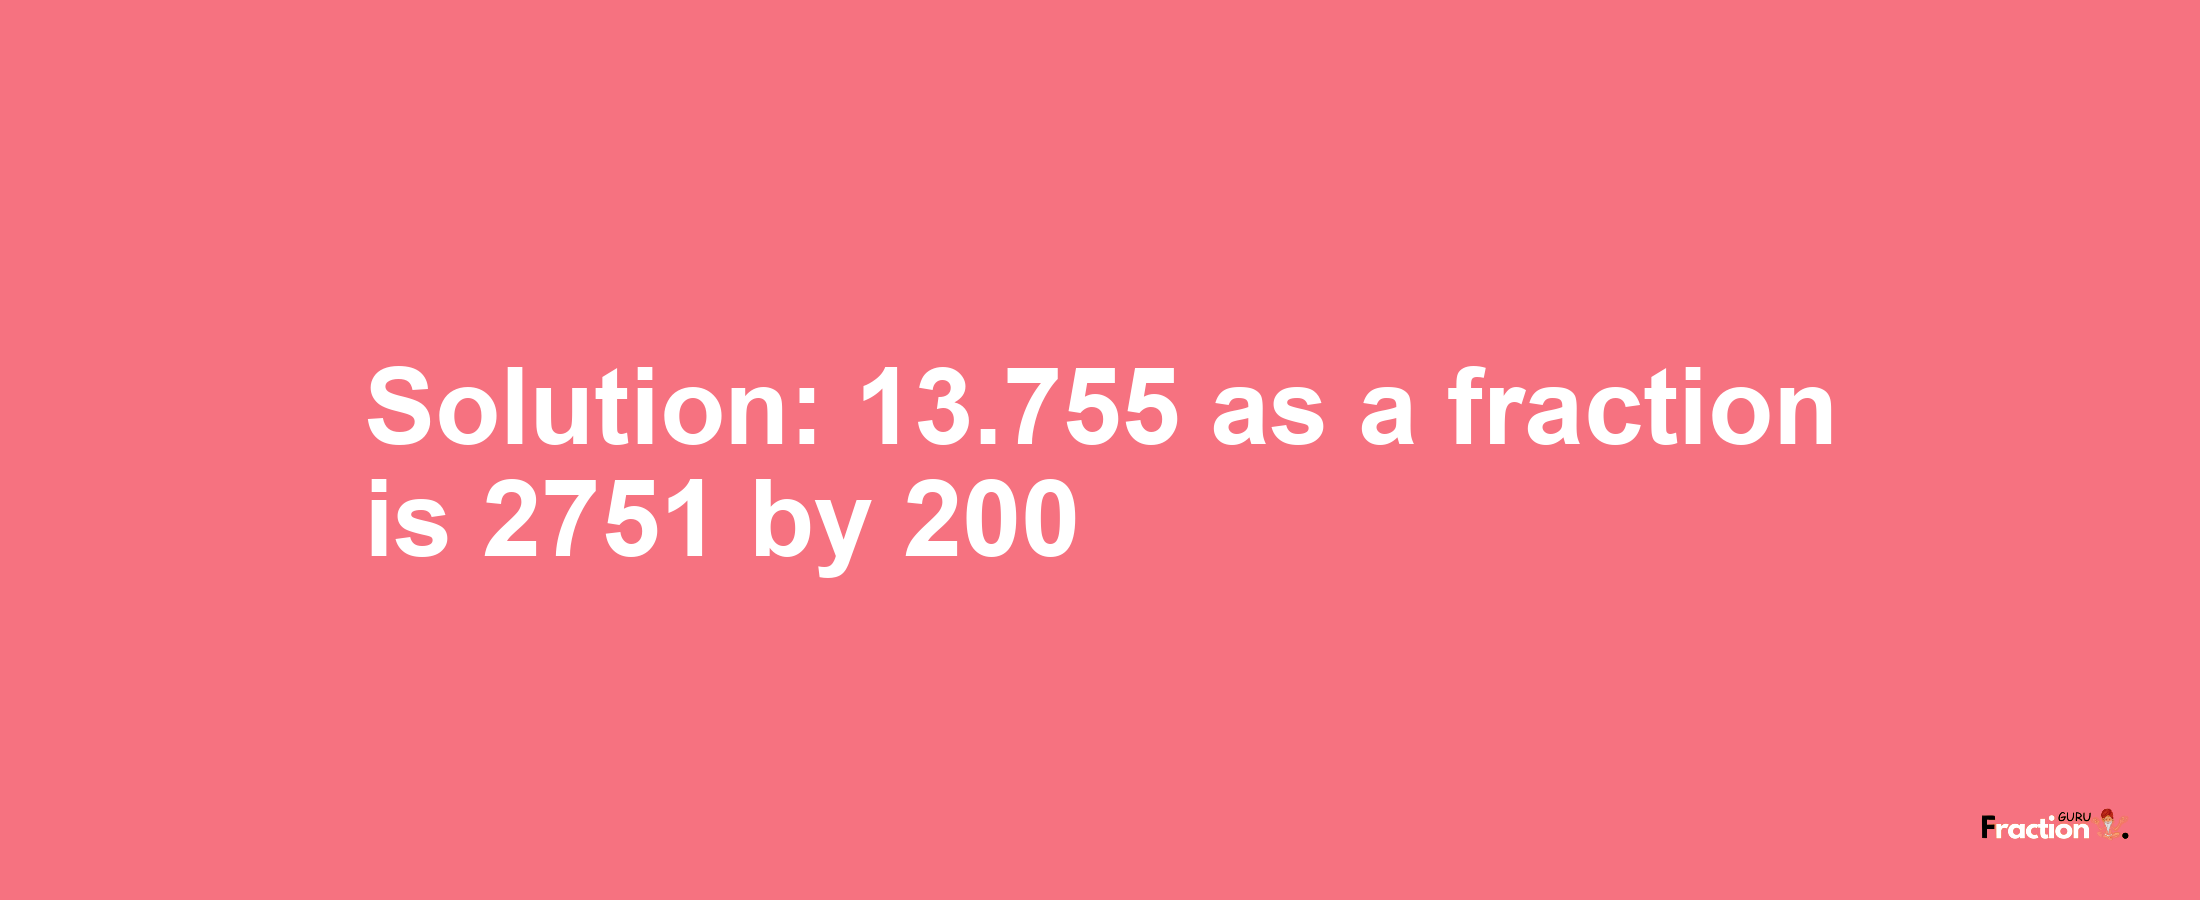 Solution:13.755 as a fraction is 2751/200